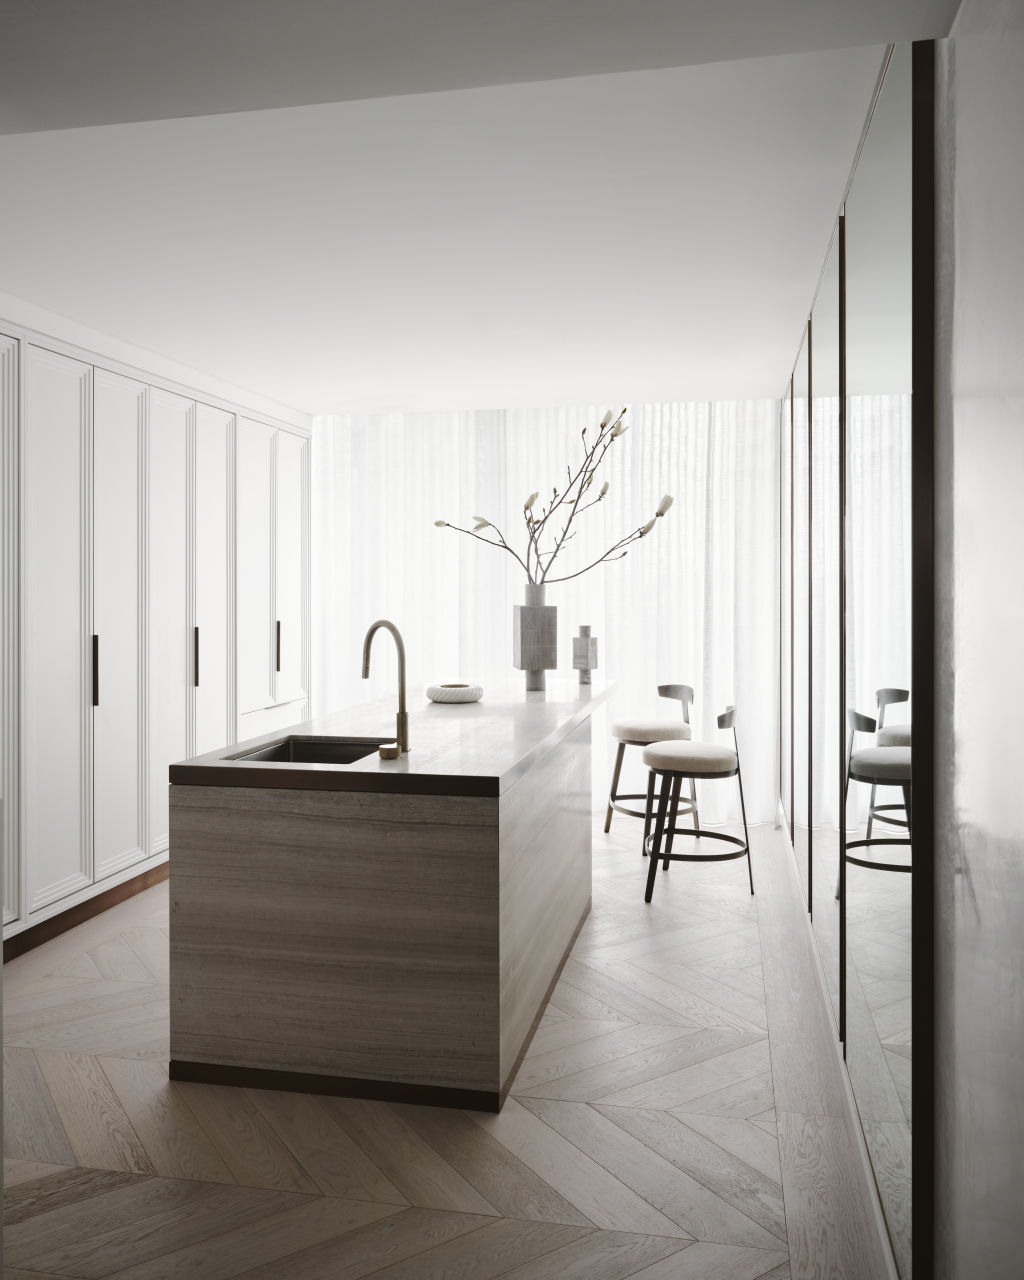 The two-storey apartment has an entertainer's kitchen and three terraces. Photo: Supplied